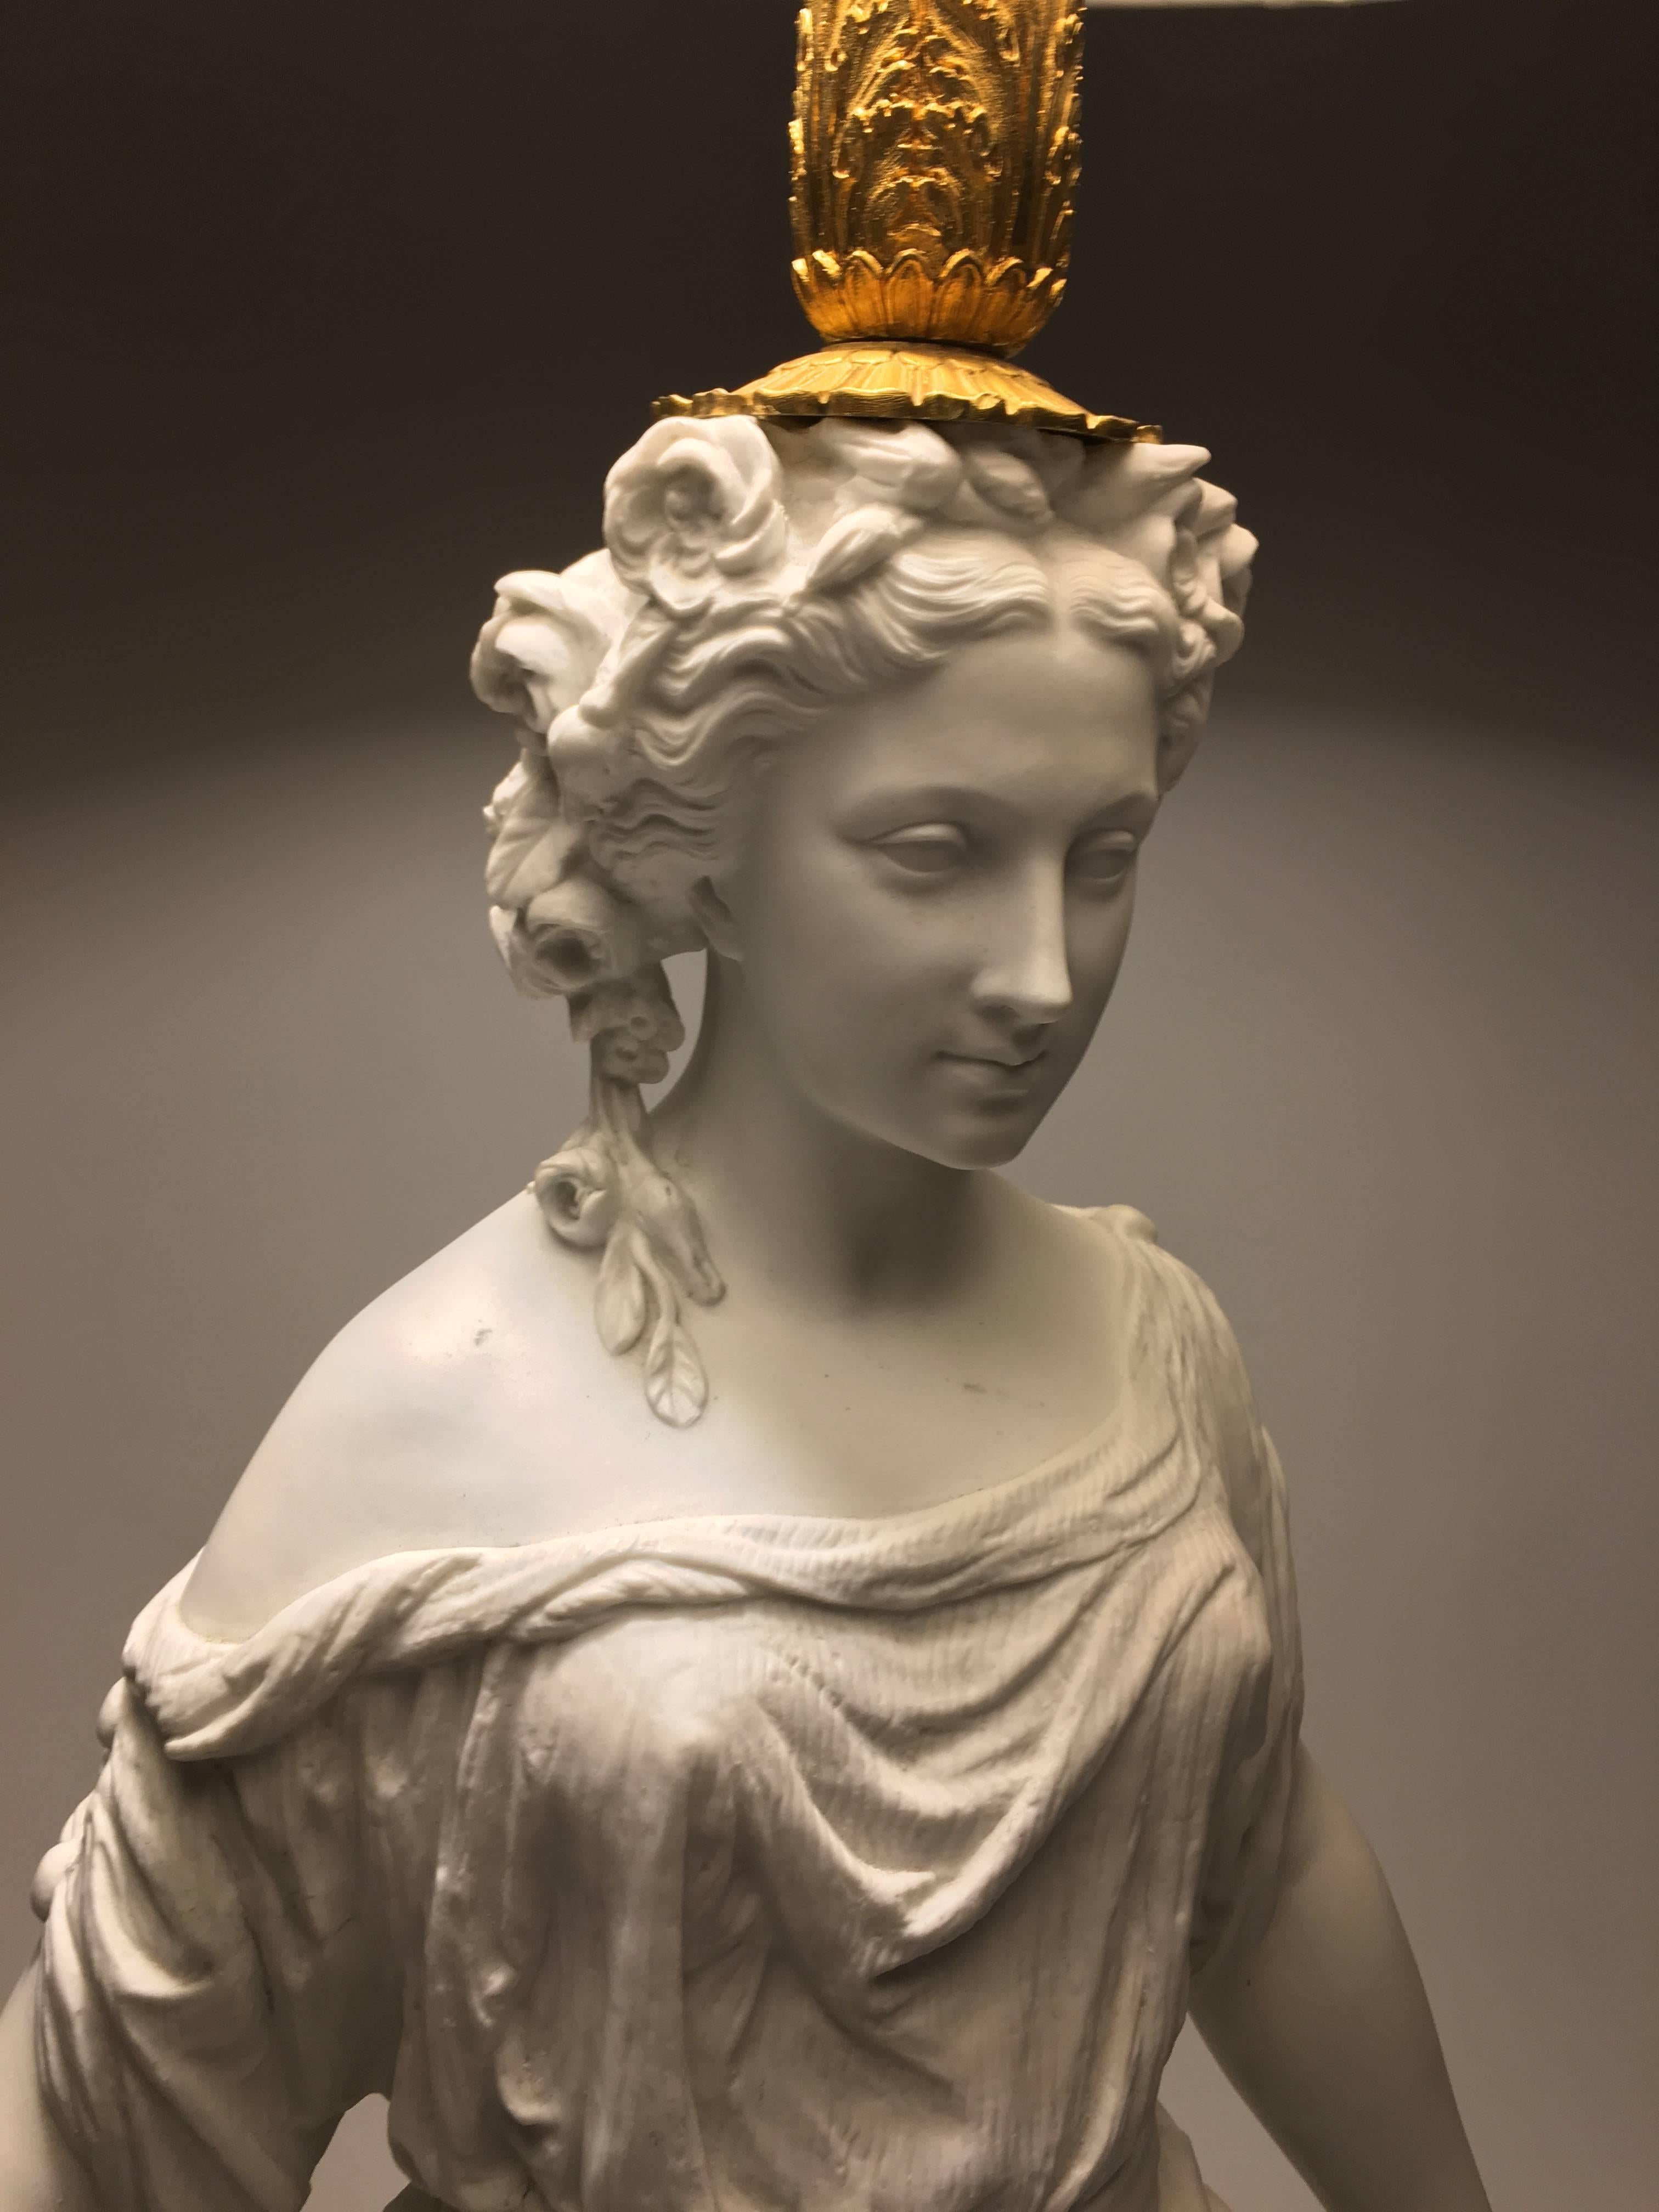 A fine quality French neoclassical lamp in biscuit porcelain in the form of a classical female figure, wearing a beautifully modelled draped garment, holding a scroll in each hand, on a fine gilded base with beaded and berried laurel wreath